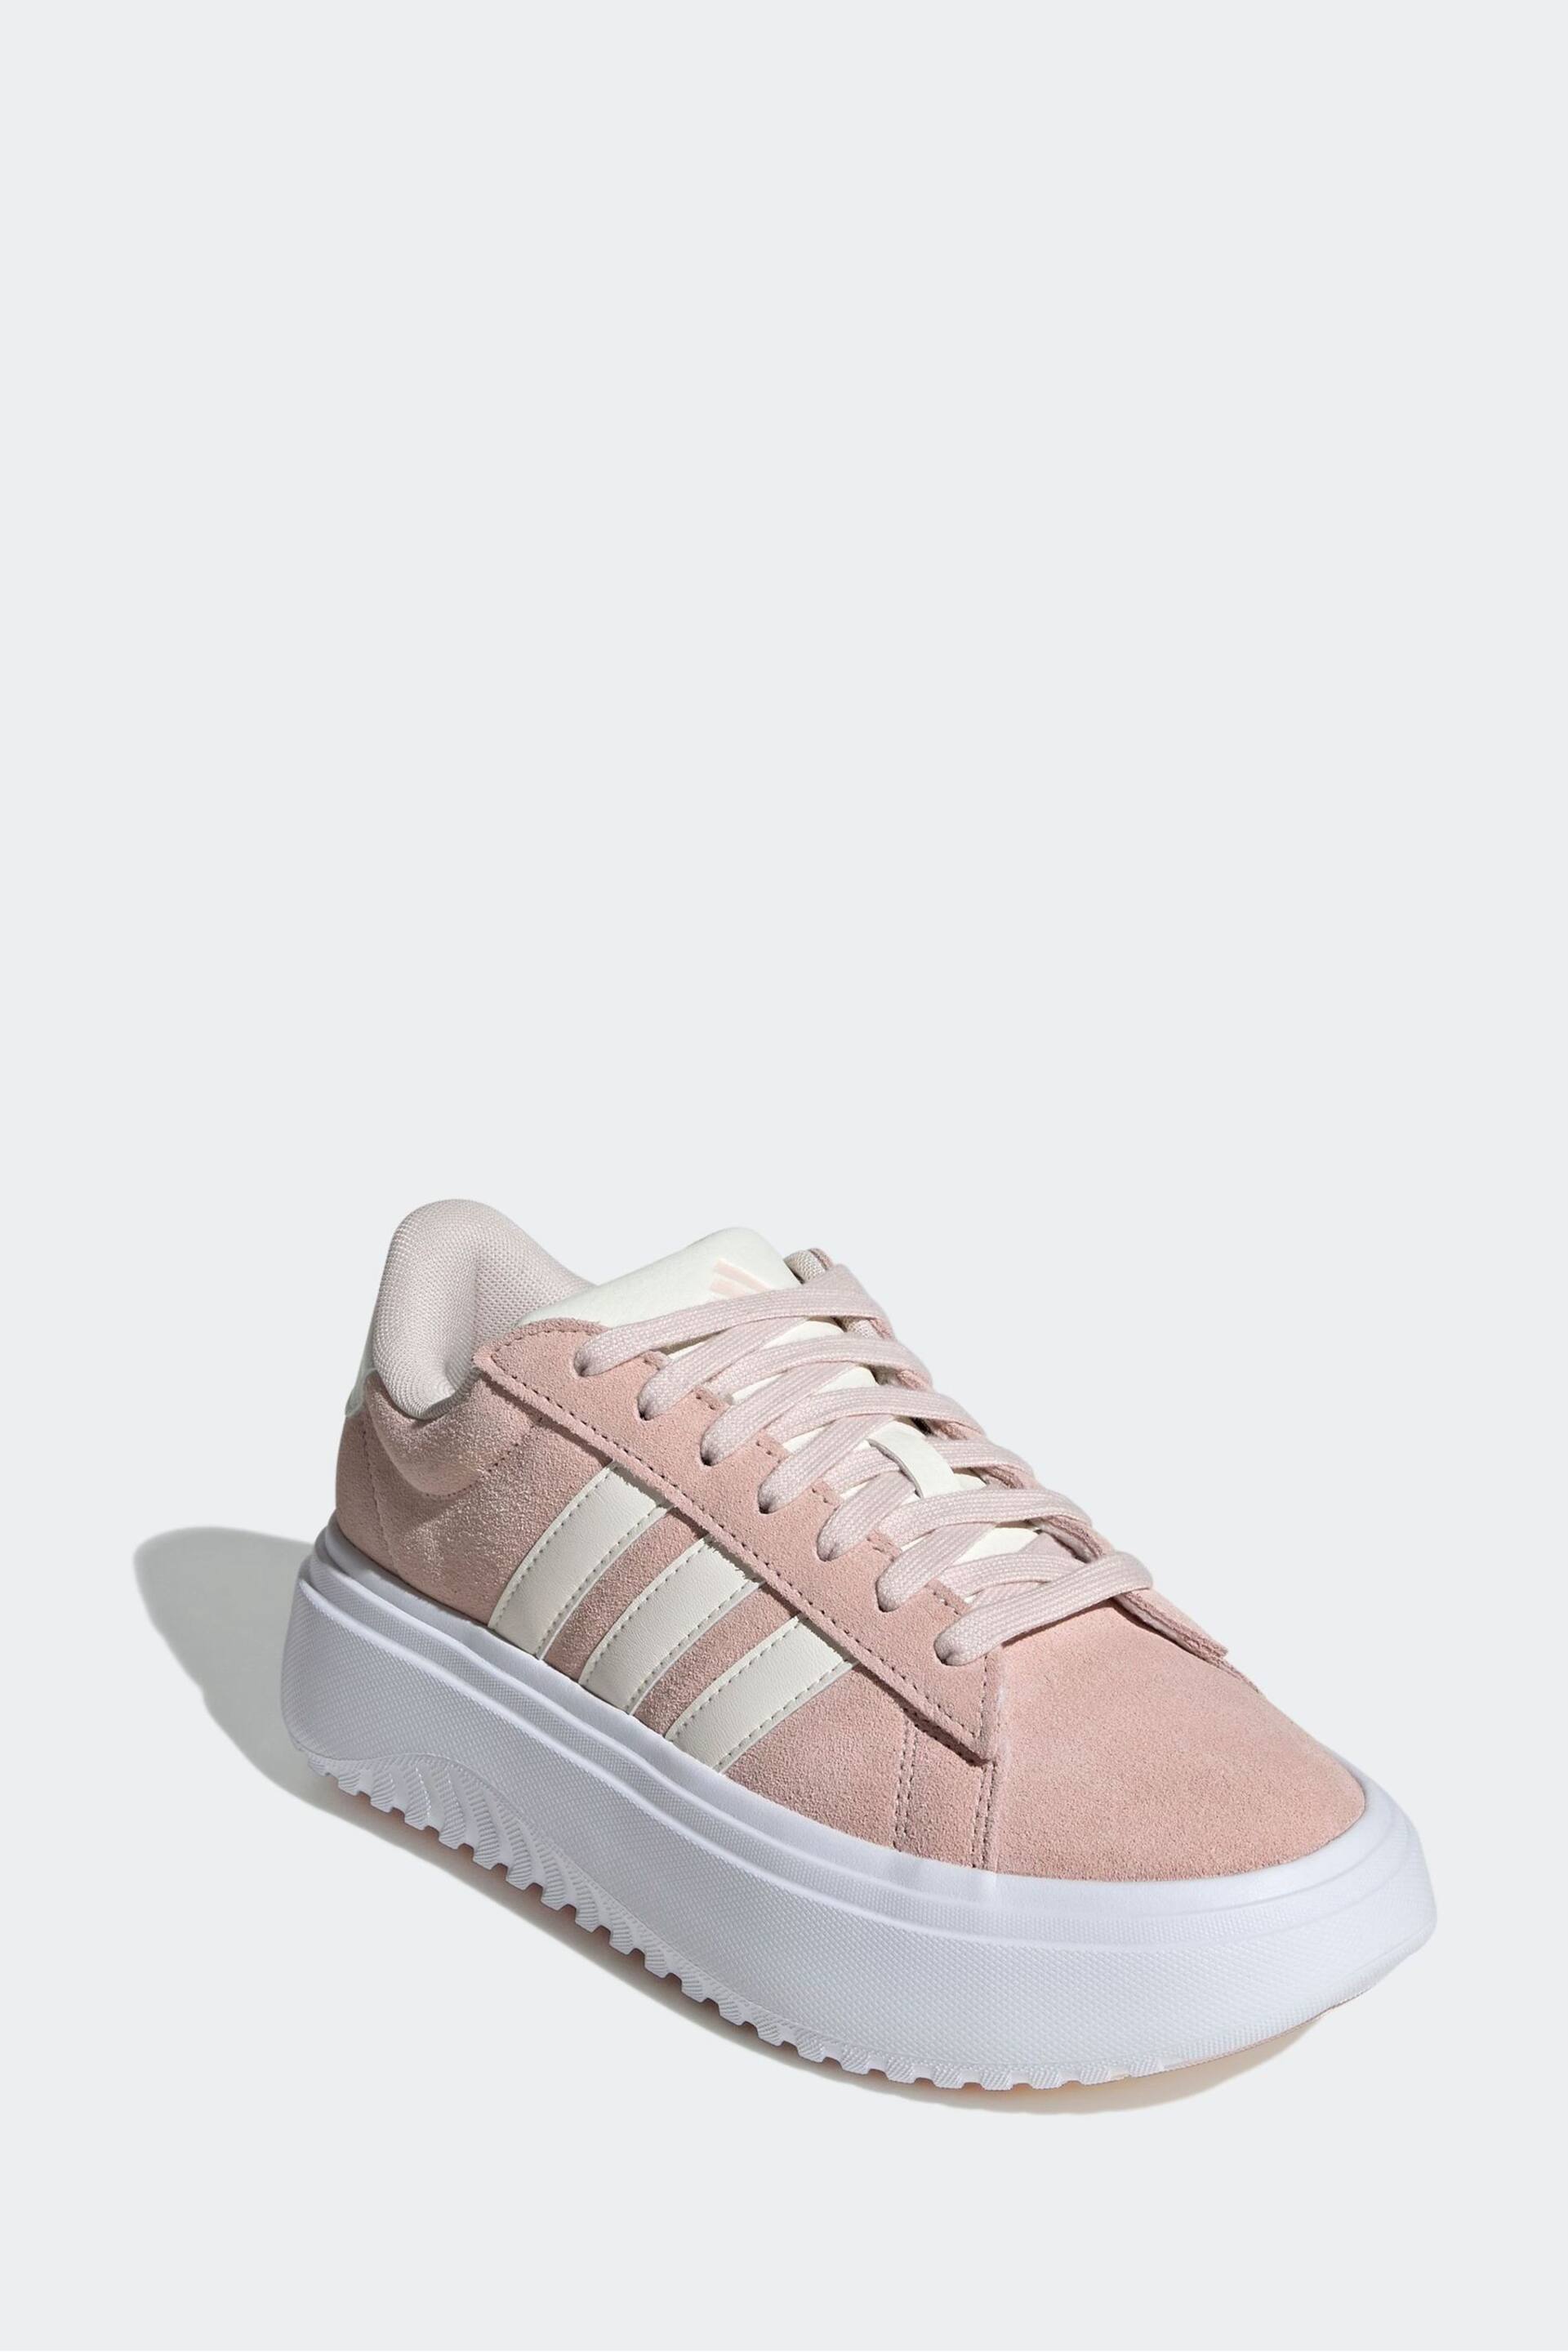 adidas Pink Grand Court Platform Suede Shoes - Image 3 of 8